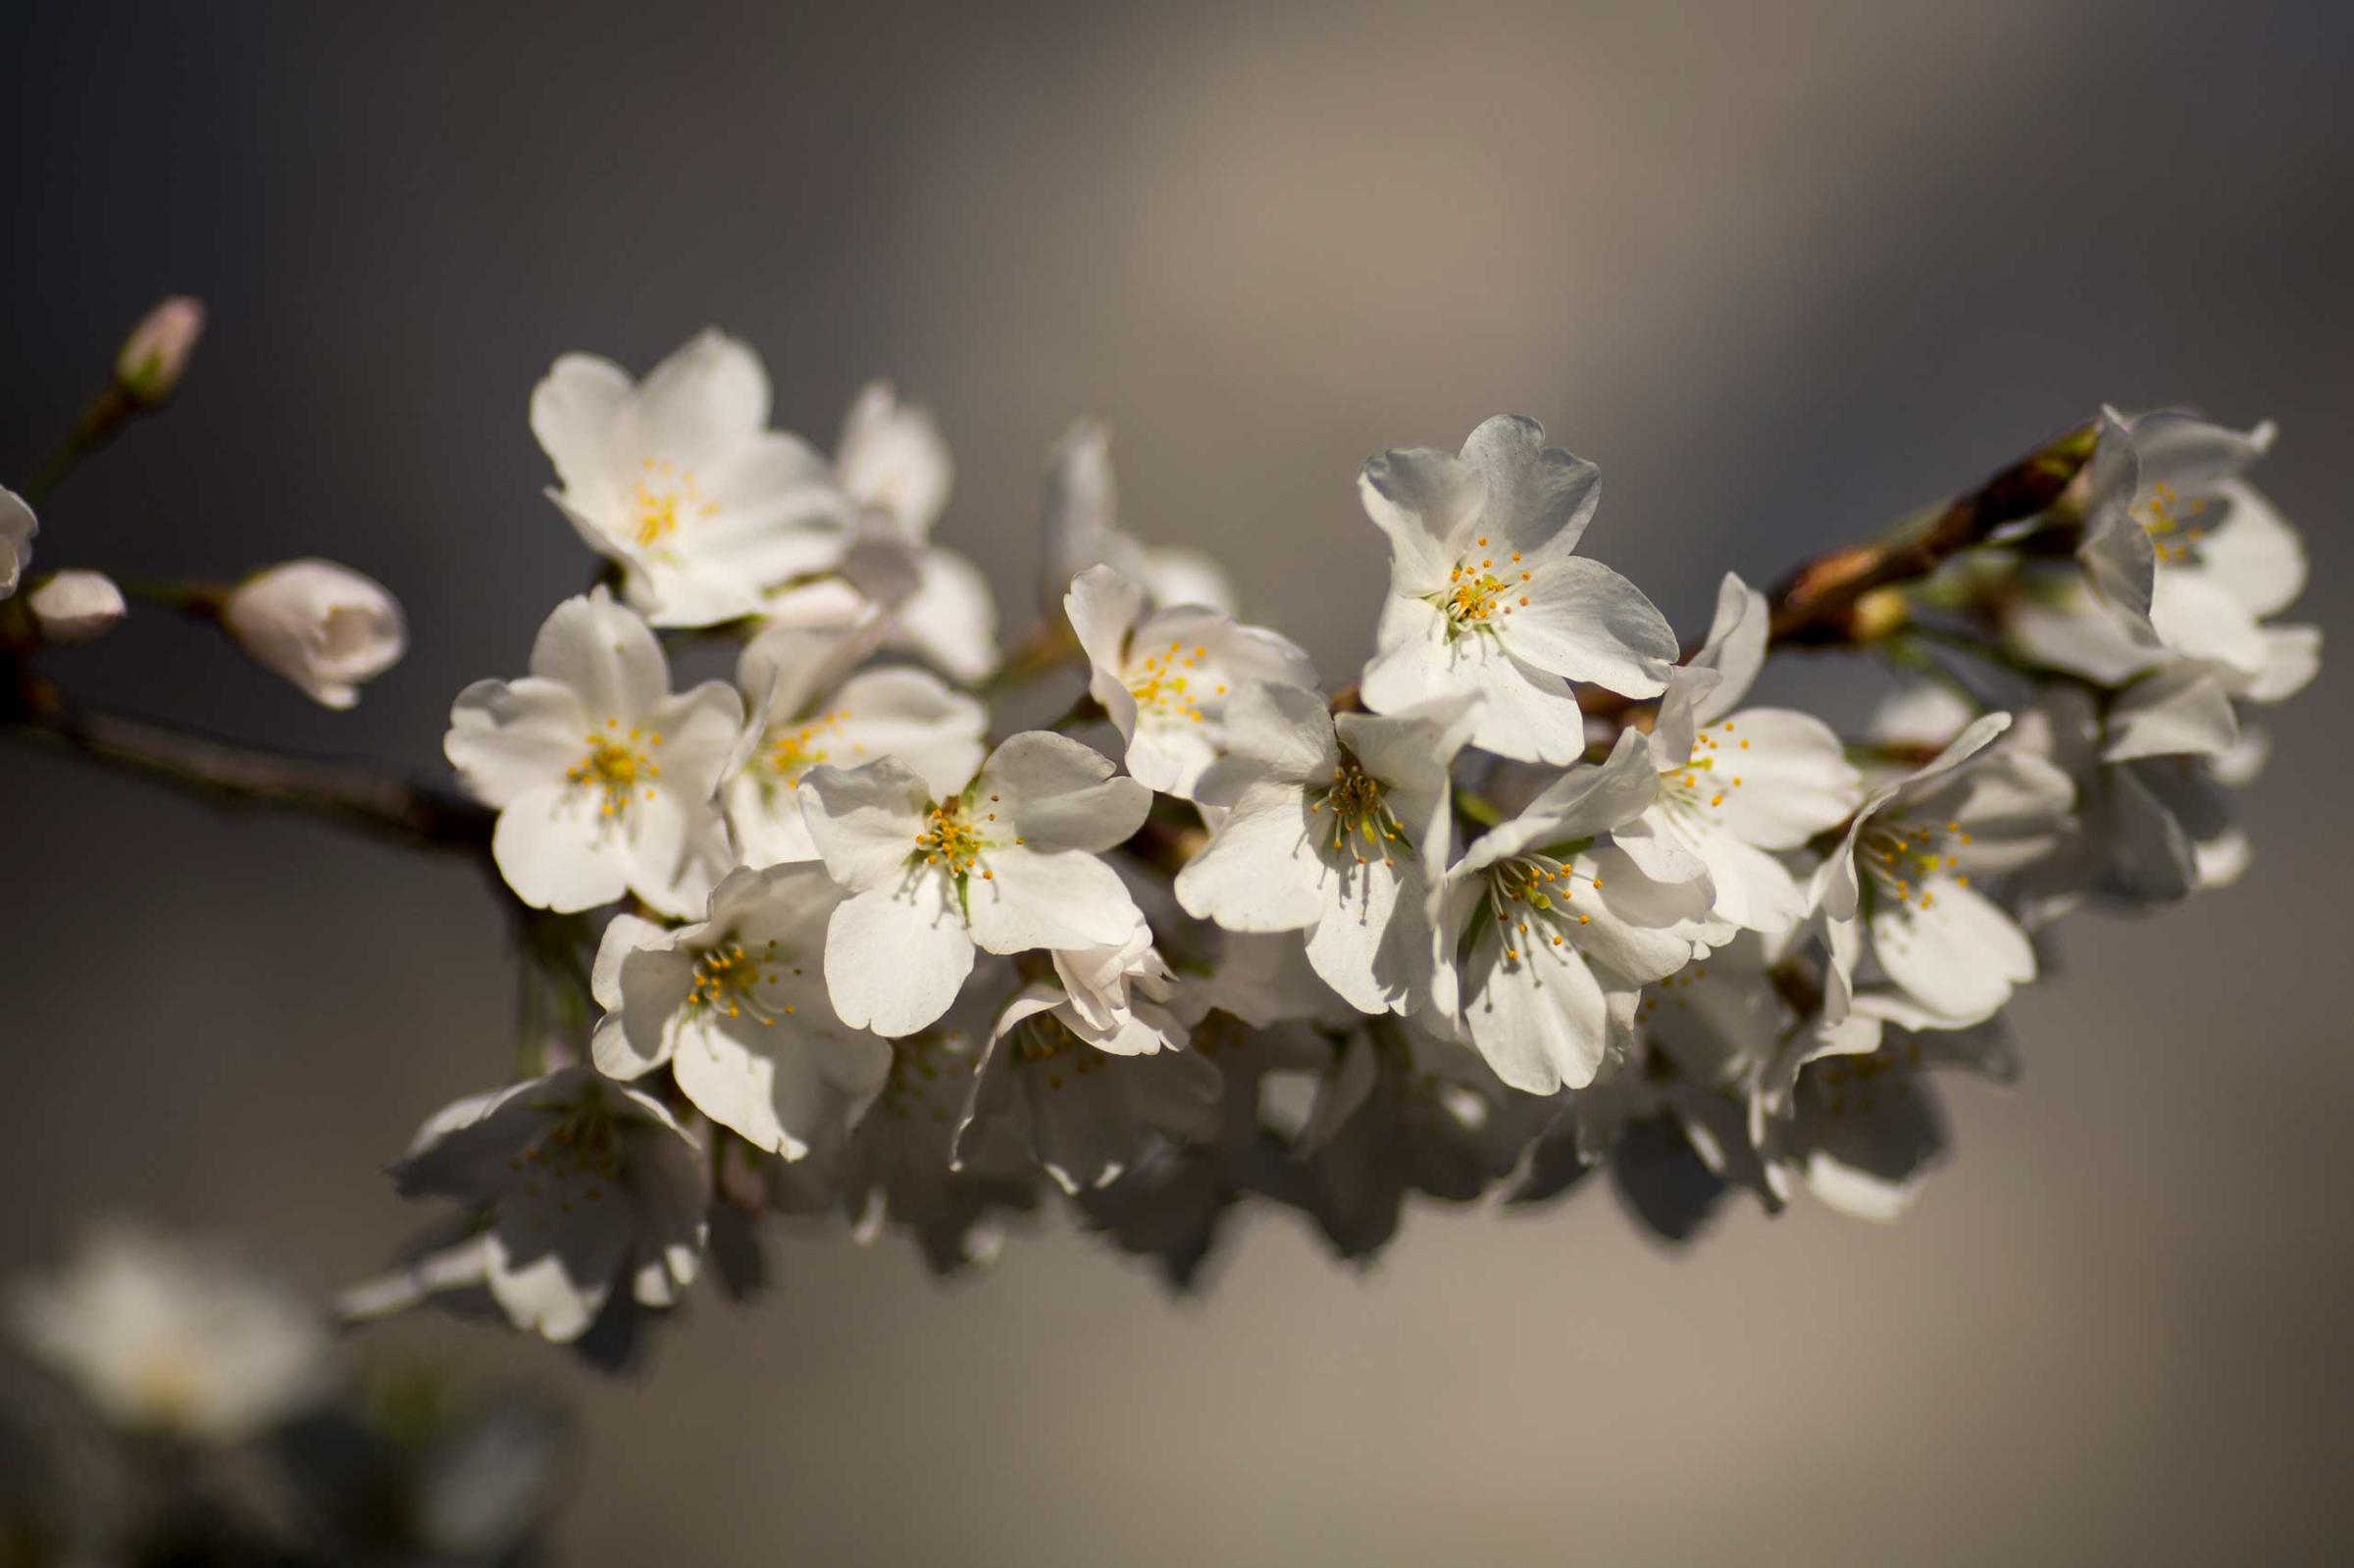 The blossoms of cherry trees in bloom along the Tidal Basin in Washington, D.C. on April 11, 2015.